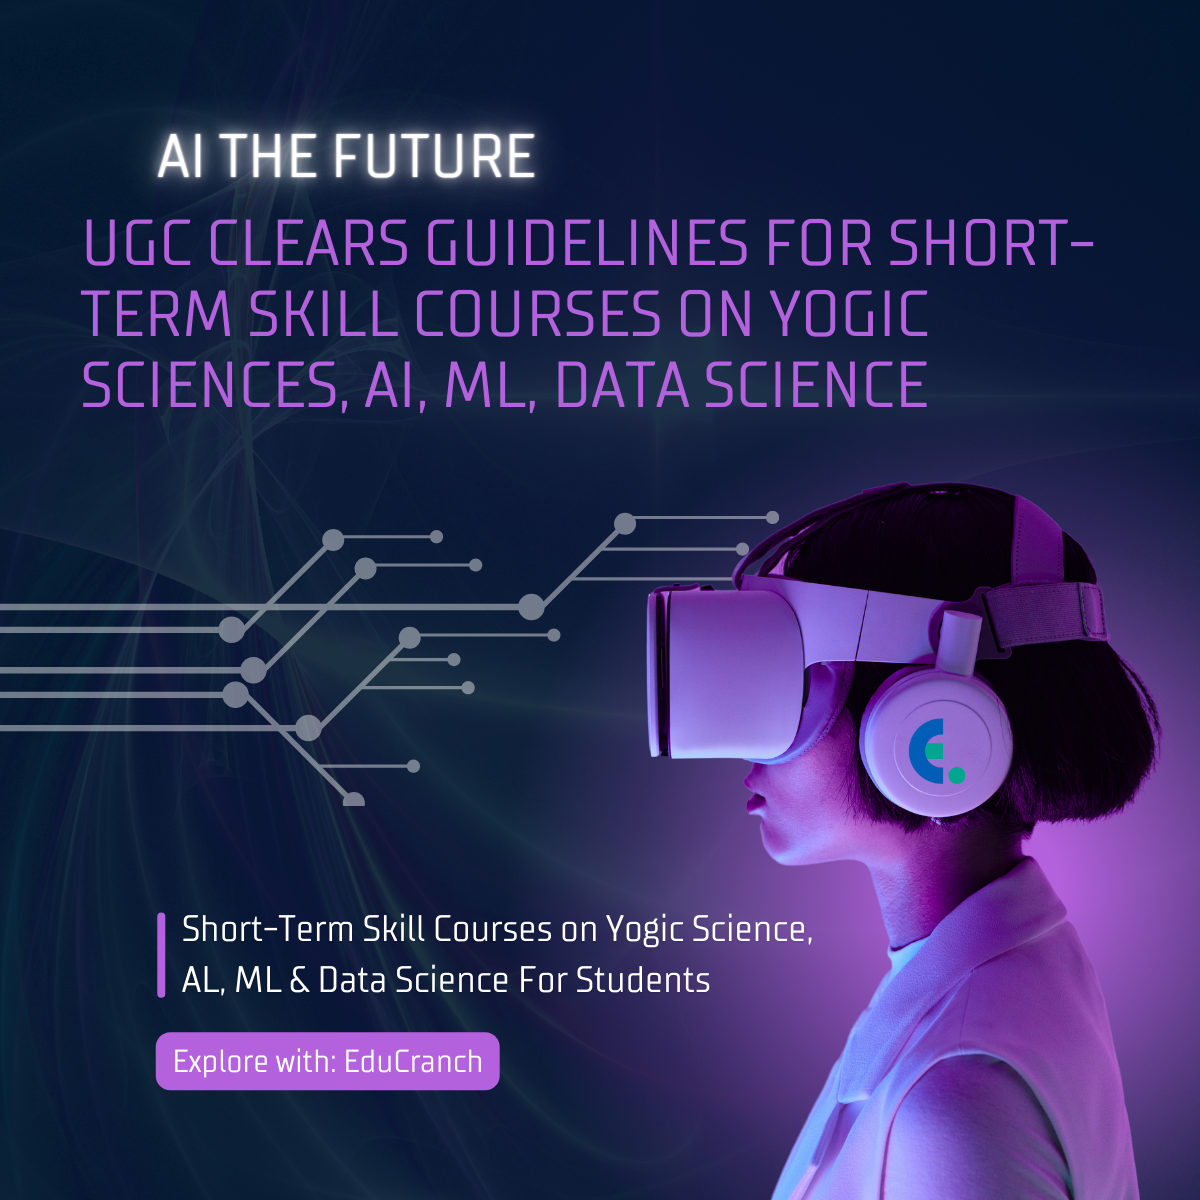 UGC Clears Guidelines for Short-Term Skill Courses on Yogic Sciences, AI, ML, Data Science